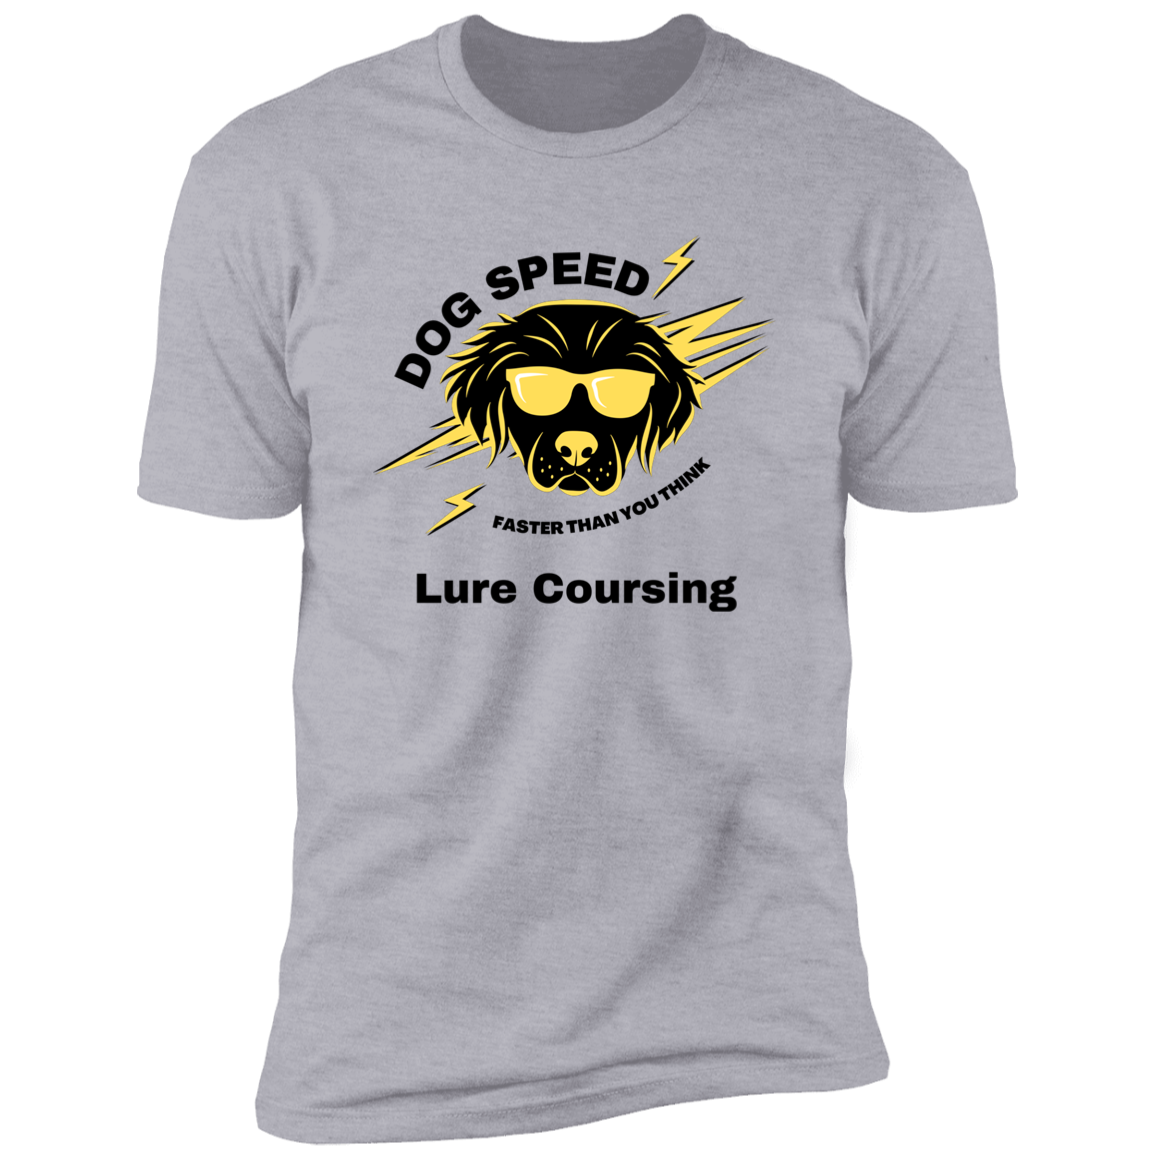 Dog Speed Faster Than You Think Lure Coursing T-shirt, Lure Coursing shirt dog shirt for humans, in light heather gray